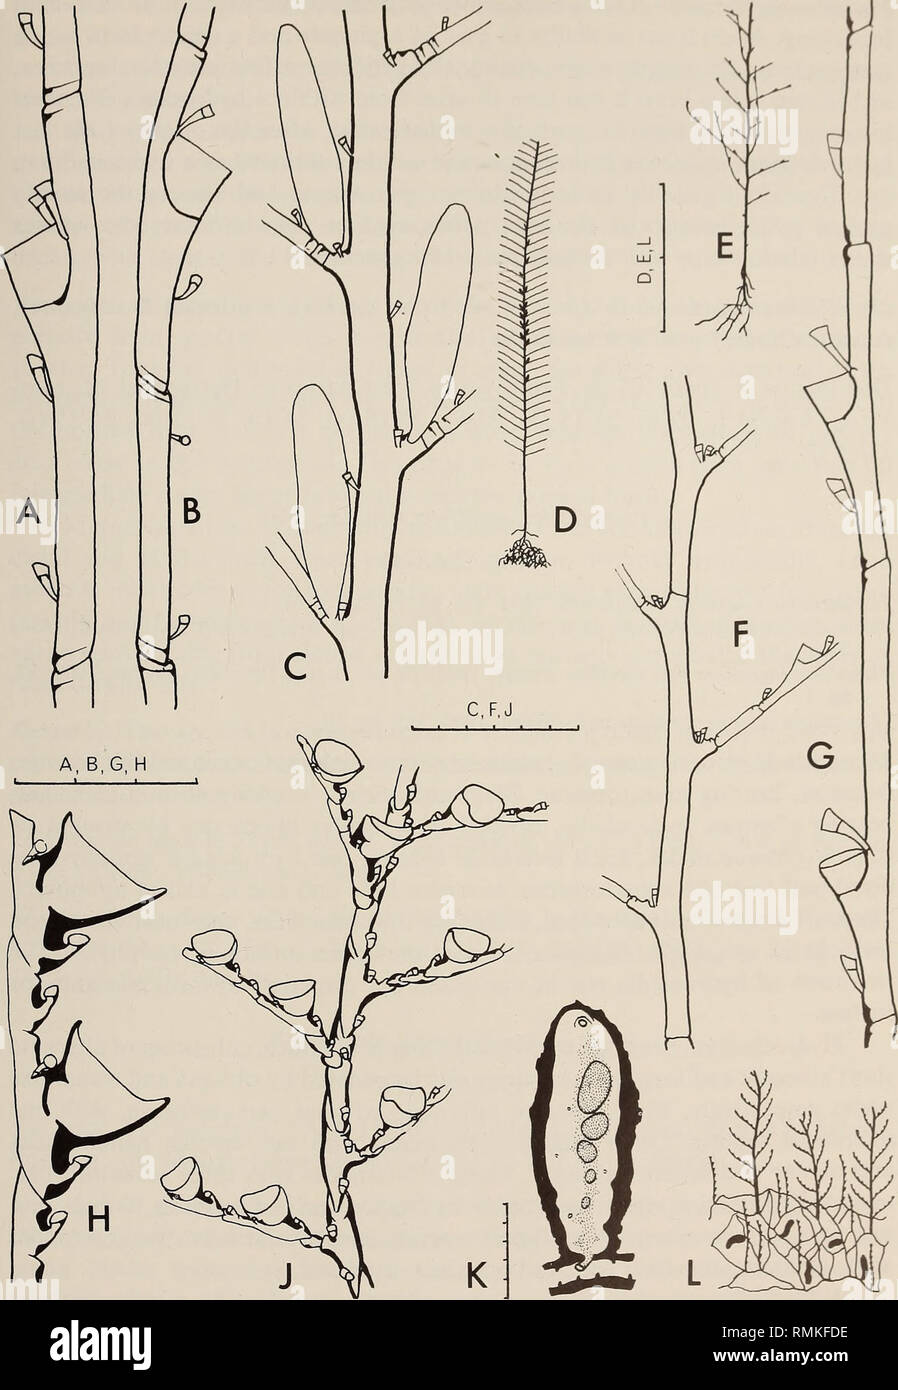 . Annals of the South African Museum = Annale van die Suid-Afrikaanse Museum. Natural history. MONOGRAPH ON THE HYDROIDA OF SOUTHERN AFRICA 391. Fig. 123. Plumularia antonbruuni. A and B, hydrocladia, A with only thecate internodes, B with alternate athecate and thecate internodes; C, part of stem with gonothecae and origins of hydro- cladia; D, stem. Plumularia mossambicae sp. nov., from holotype. E, stem; F, part of stem showing origins of hydrocladia; G, hydrocladium. Plumularia filicaulis. H, hydrocladium; J, stem in anterior view showing origins of hydrocladia; K, male gonophore; L, ferti Stock Photo